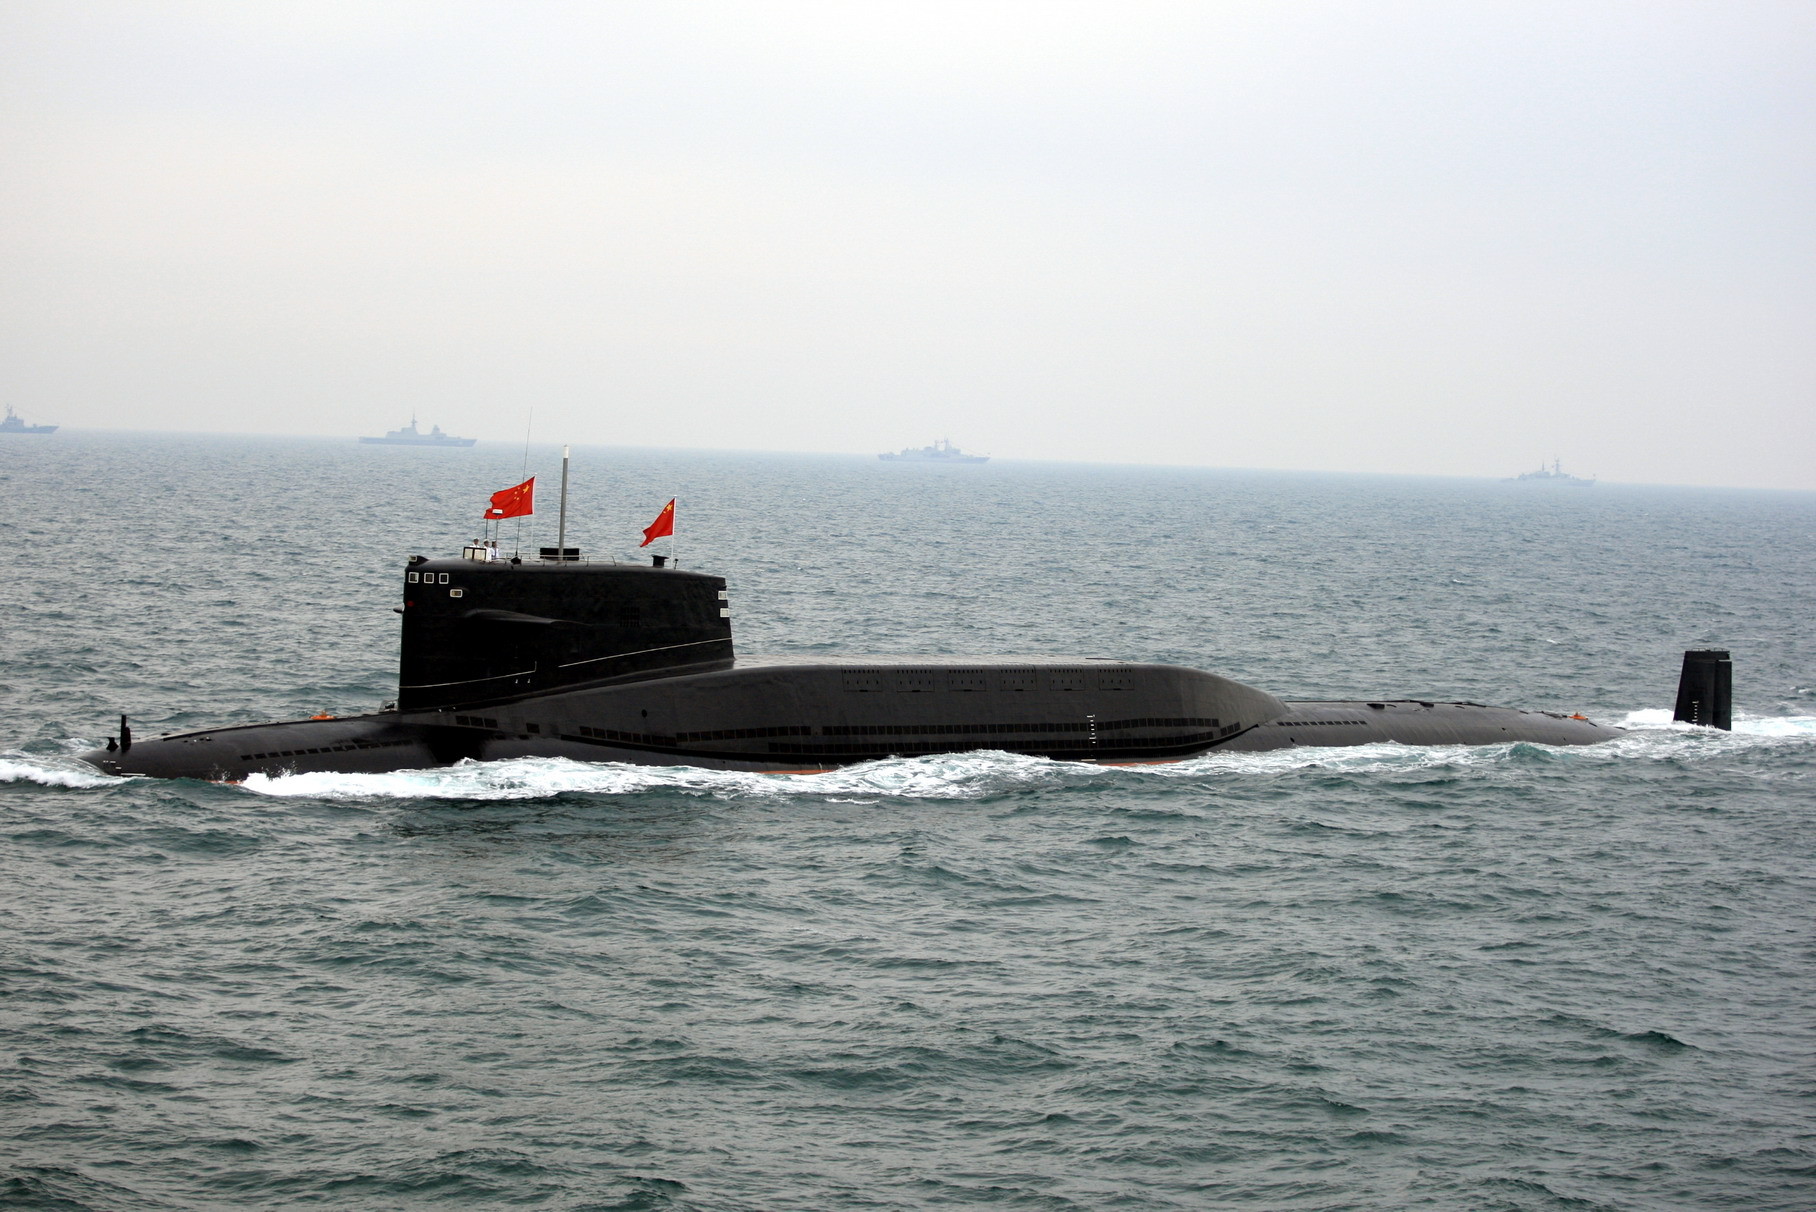 A Chinese Navy submarine participates in an international fleet review to celebrate the 60th anniversary of the founding of the People's Liberation Army Navy on April 23, 2009 in Qingdao of Shandong Province, China. (ChinaFotoPress—Getty Images)